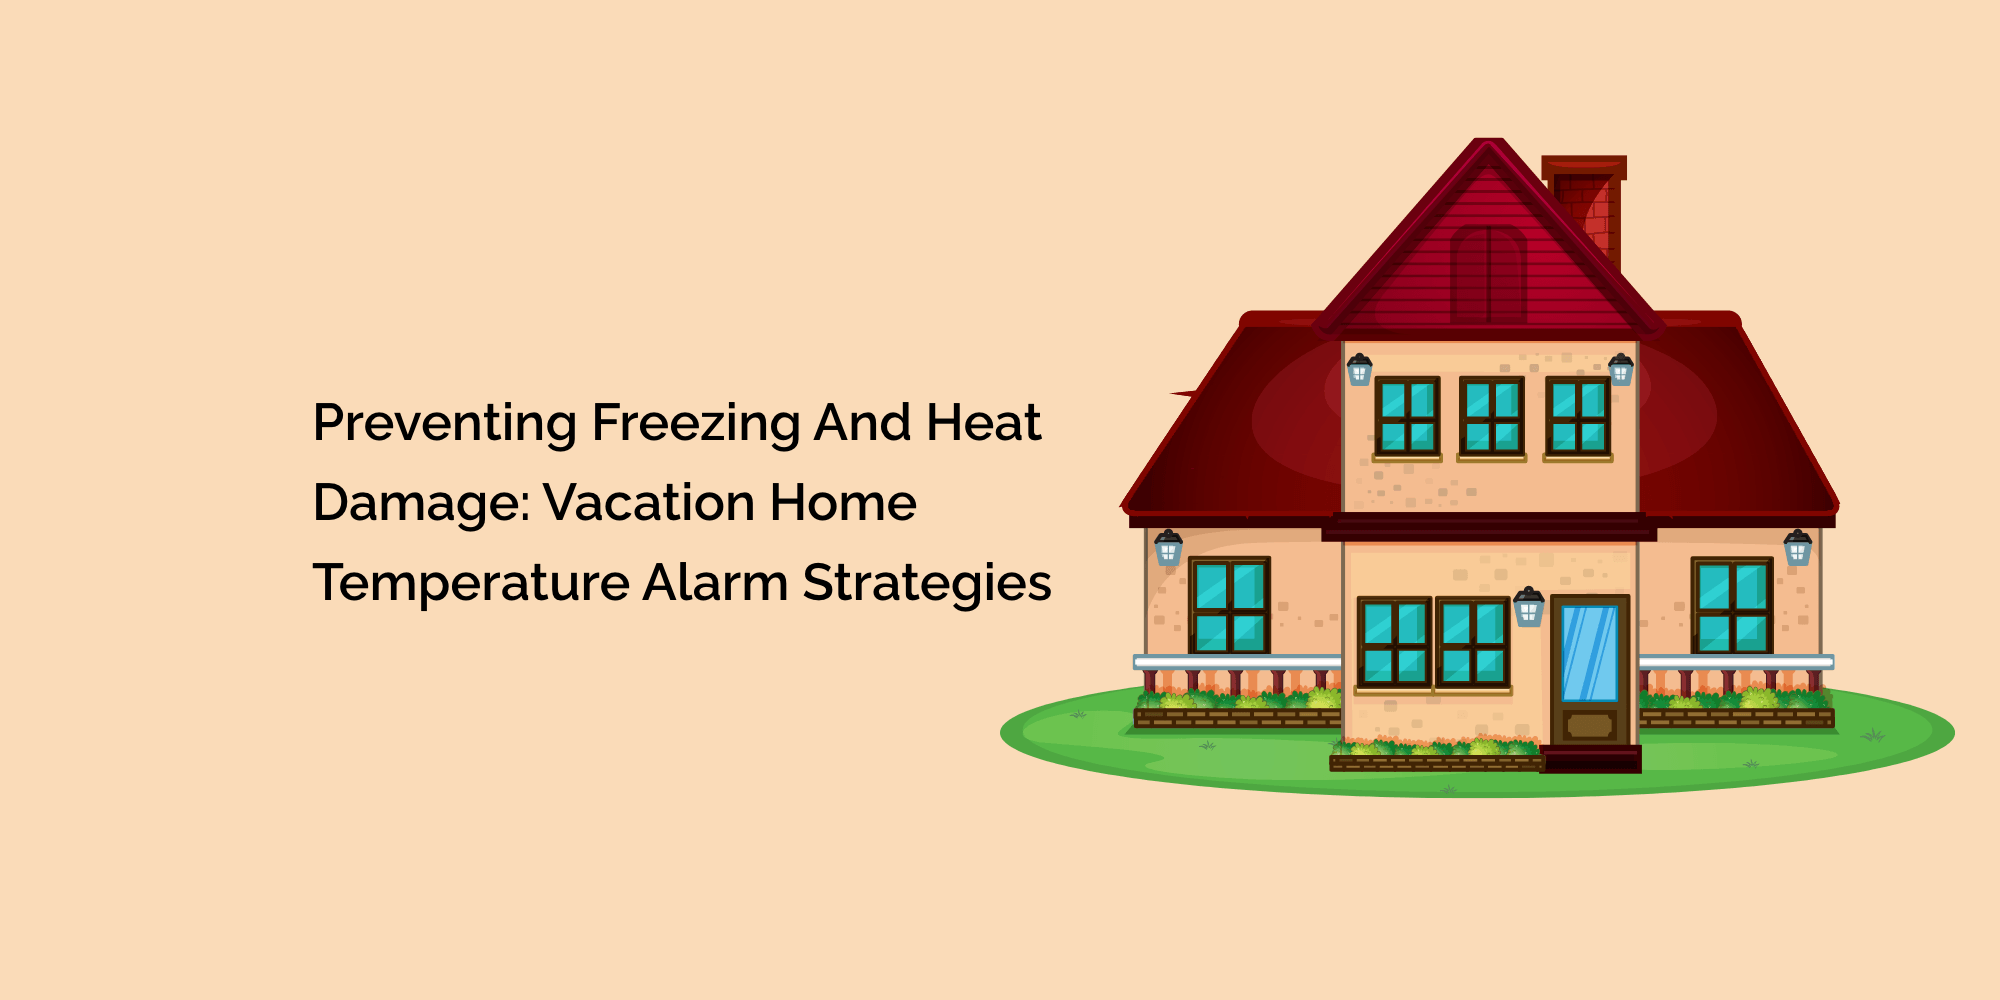 Preventing Freezing and Heat Damage: Vacation Home Temperature Alarm Strategies